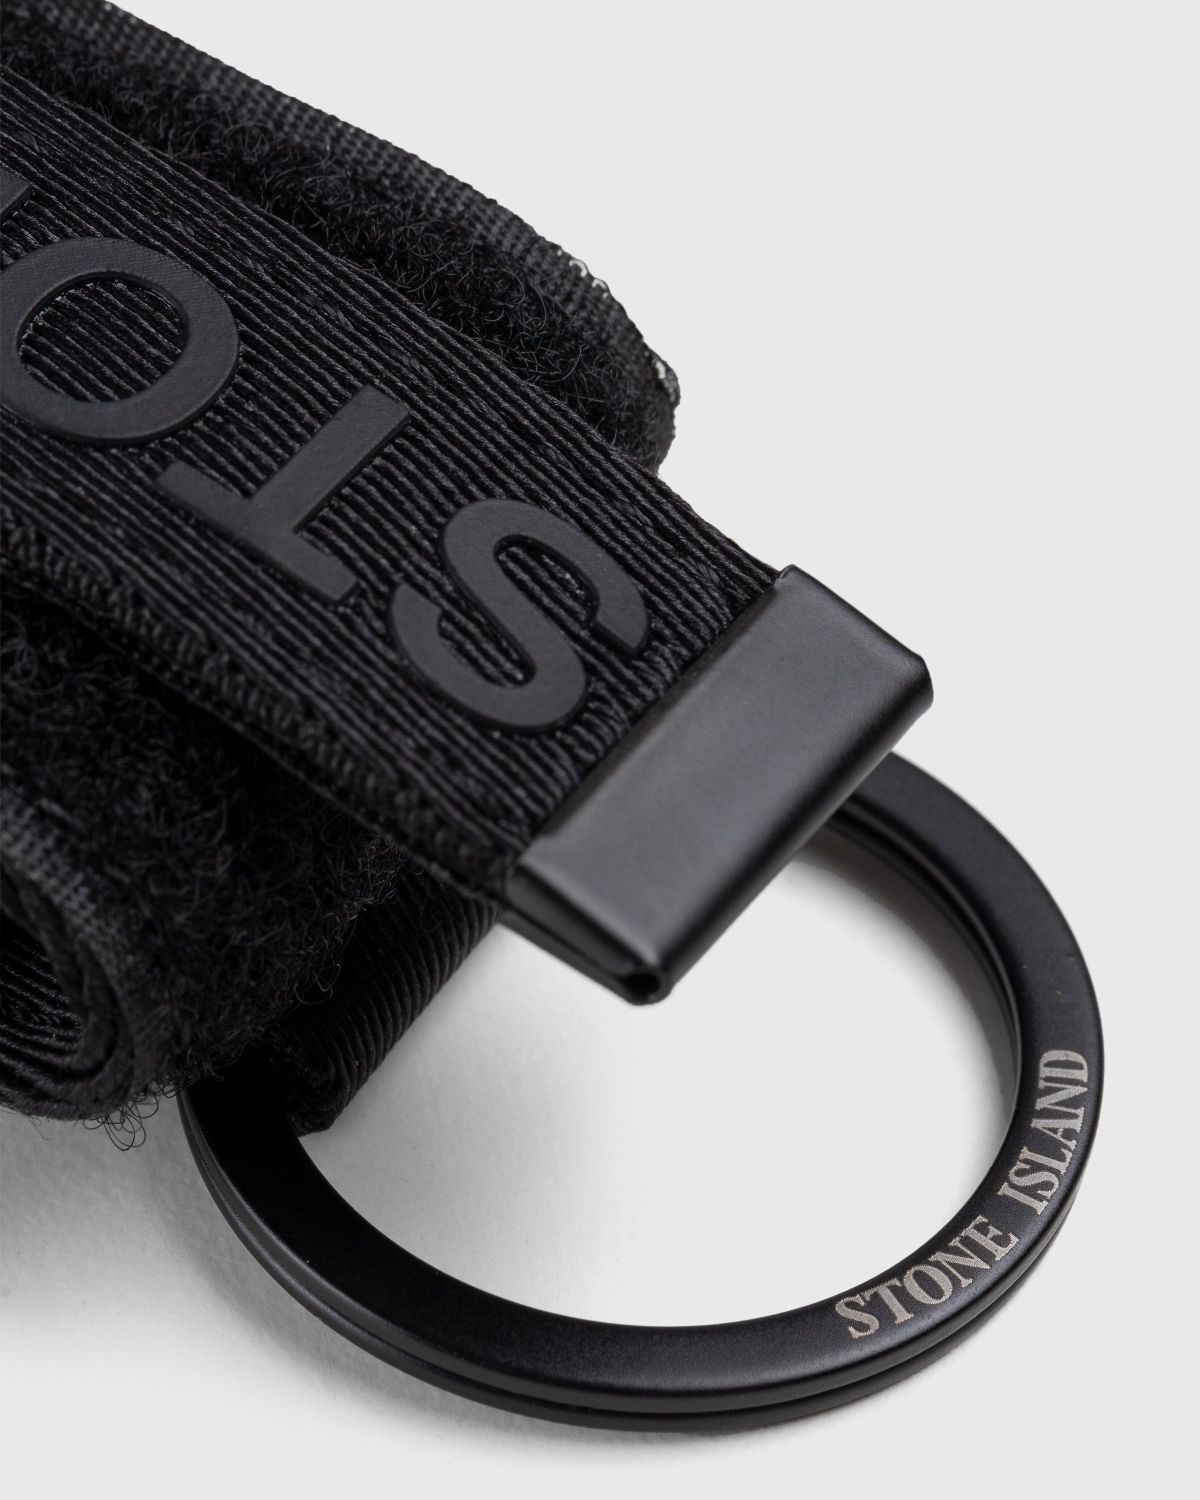 Stone Island – AirPods Case With Key Holder Black - Air Pod Cases - Black - Image 5